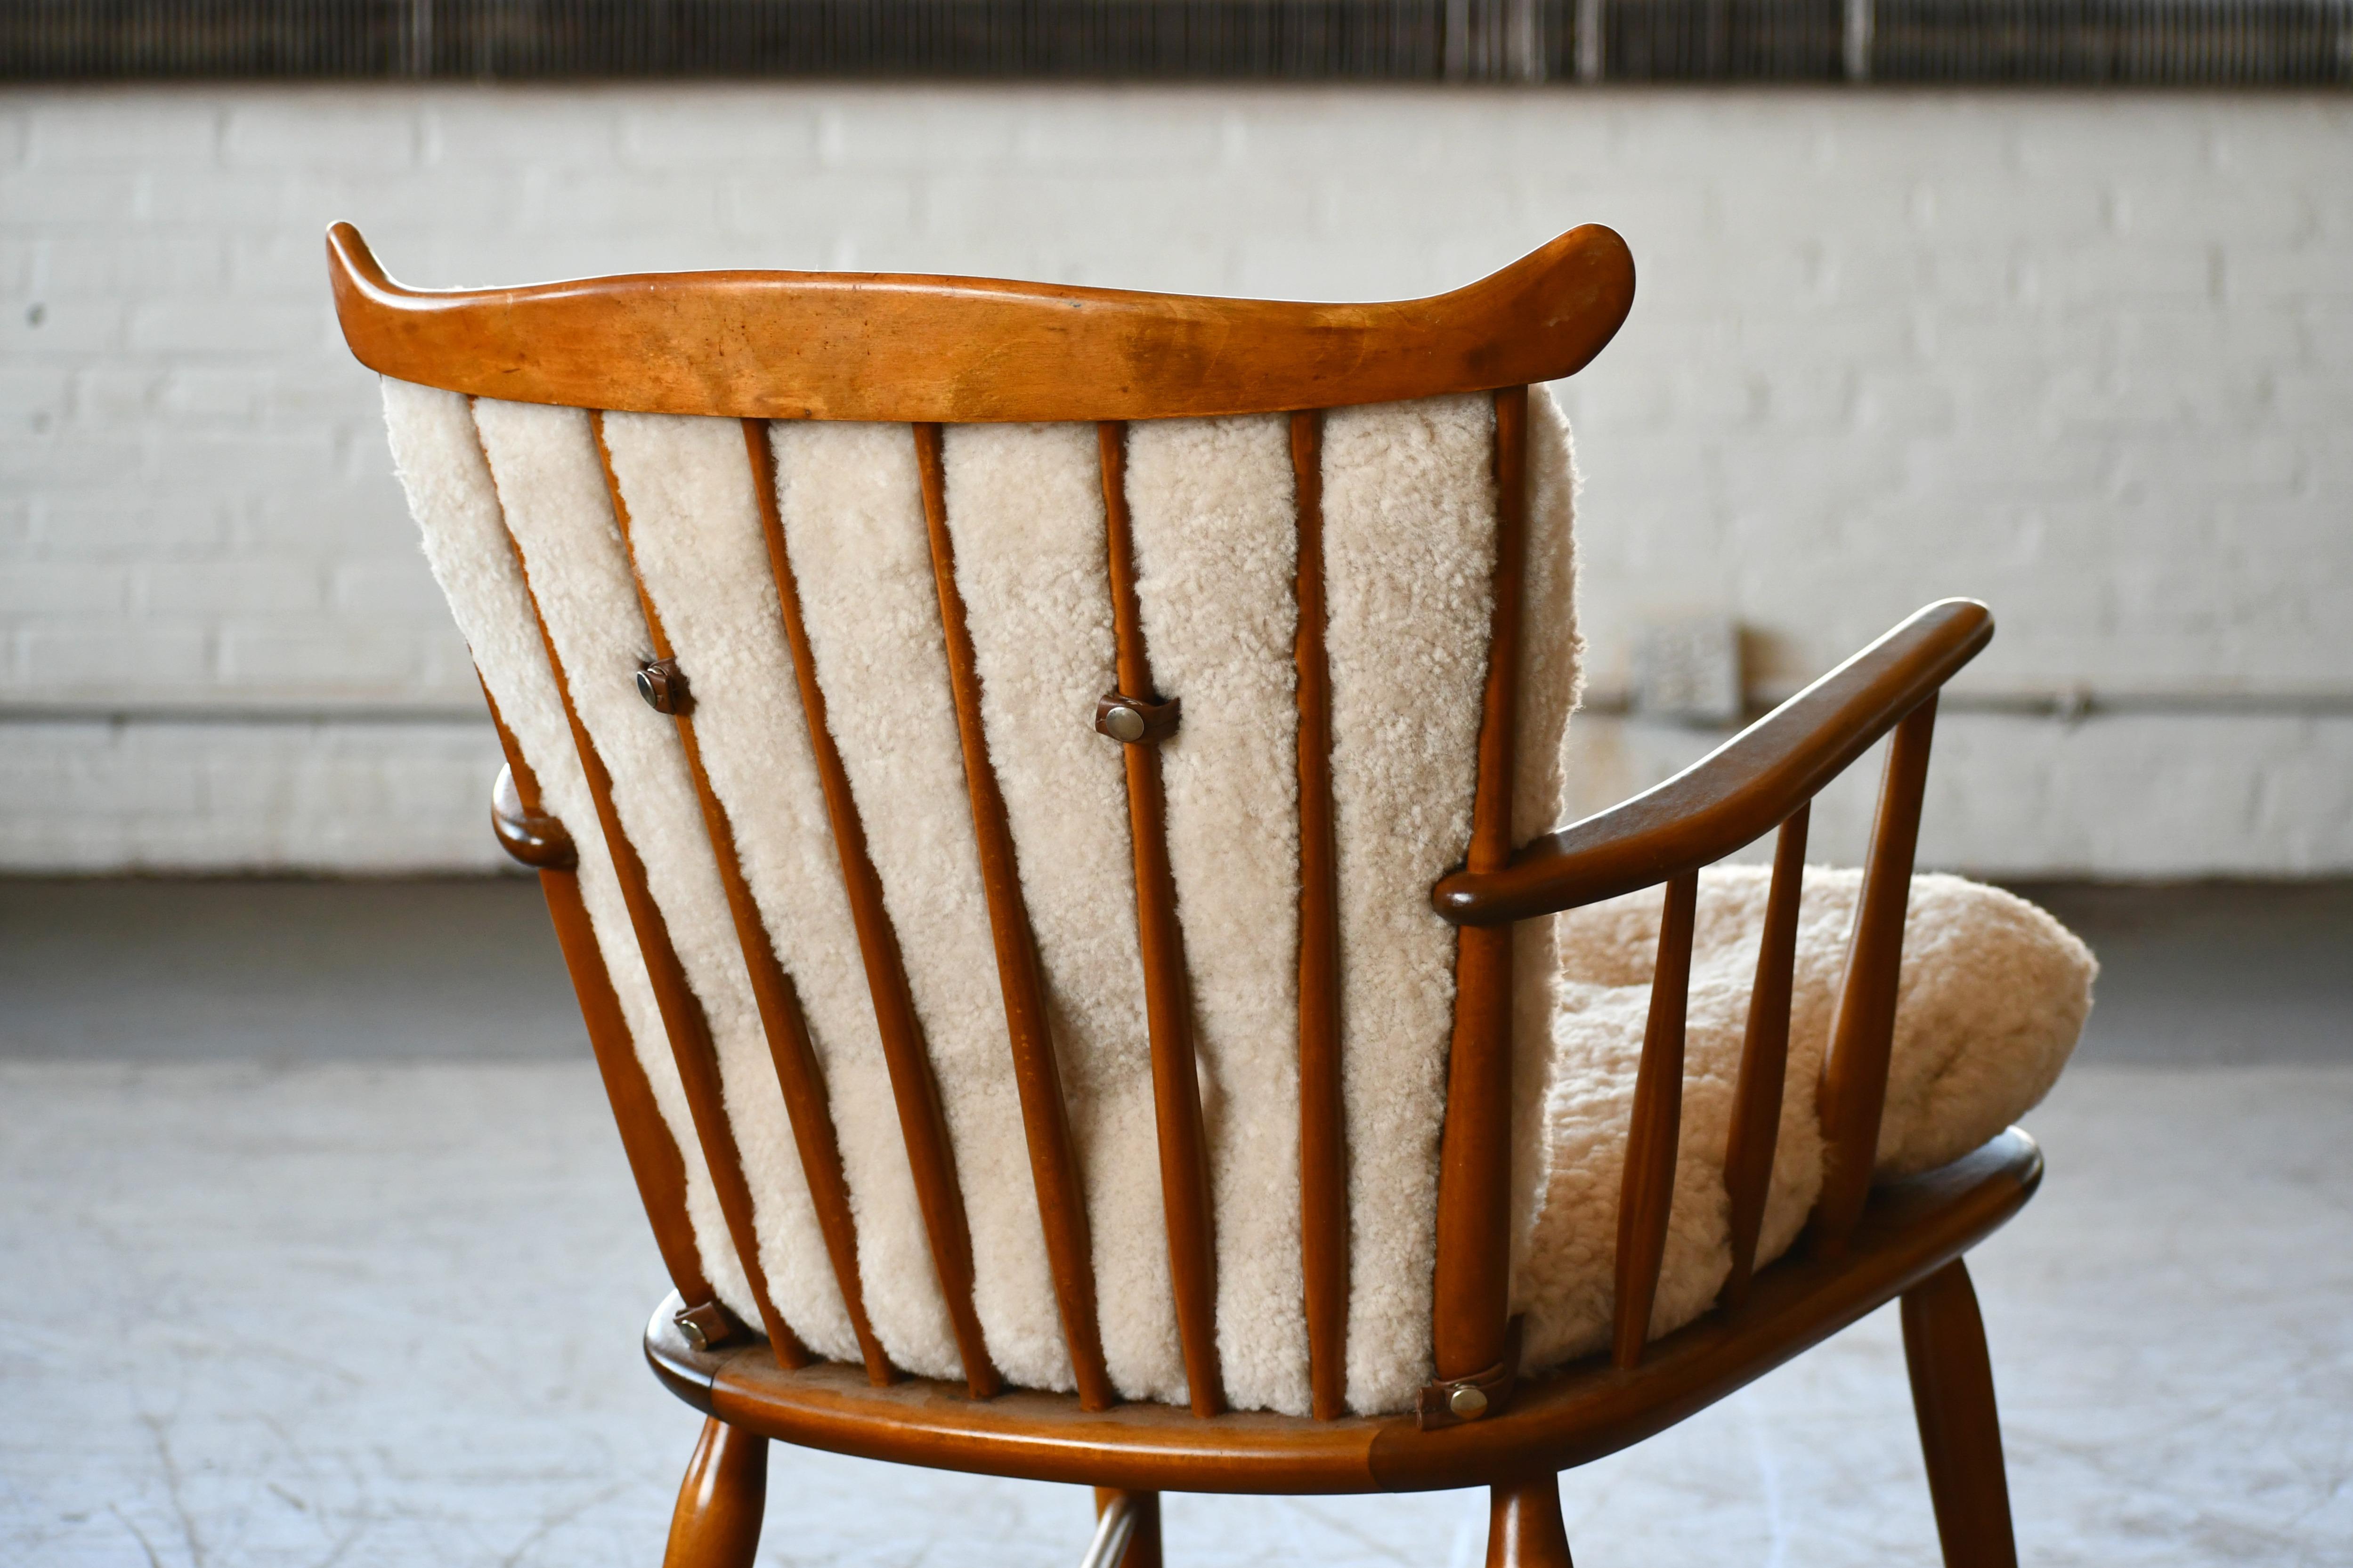 Teak Faarstrup 1950 Low Spindle Back Rocking Chair with Shearling Cushions